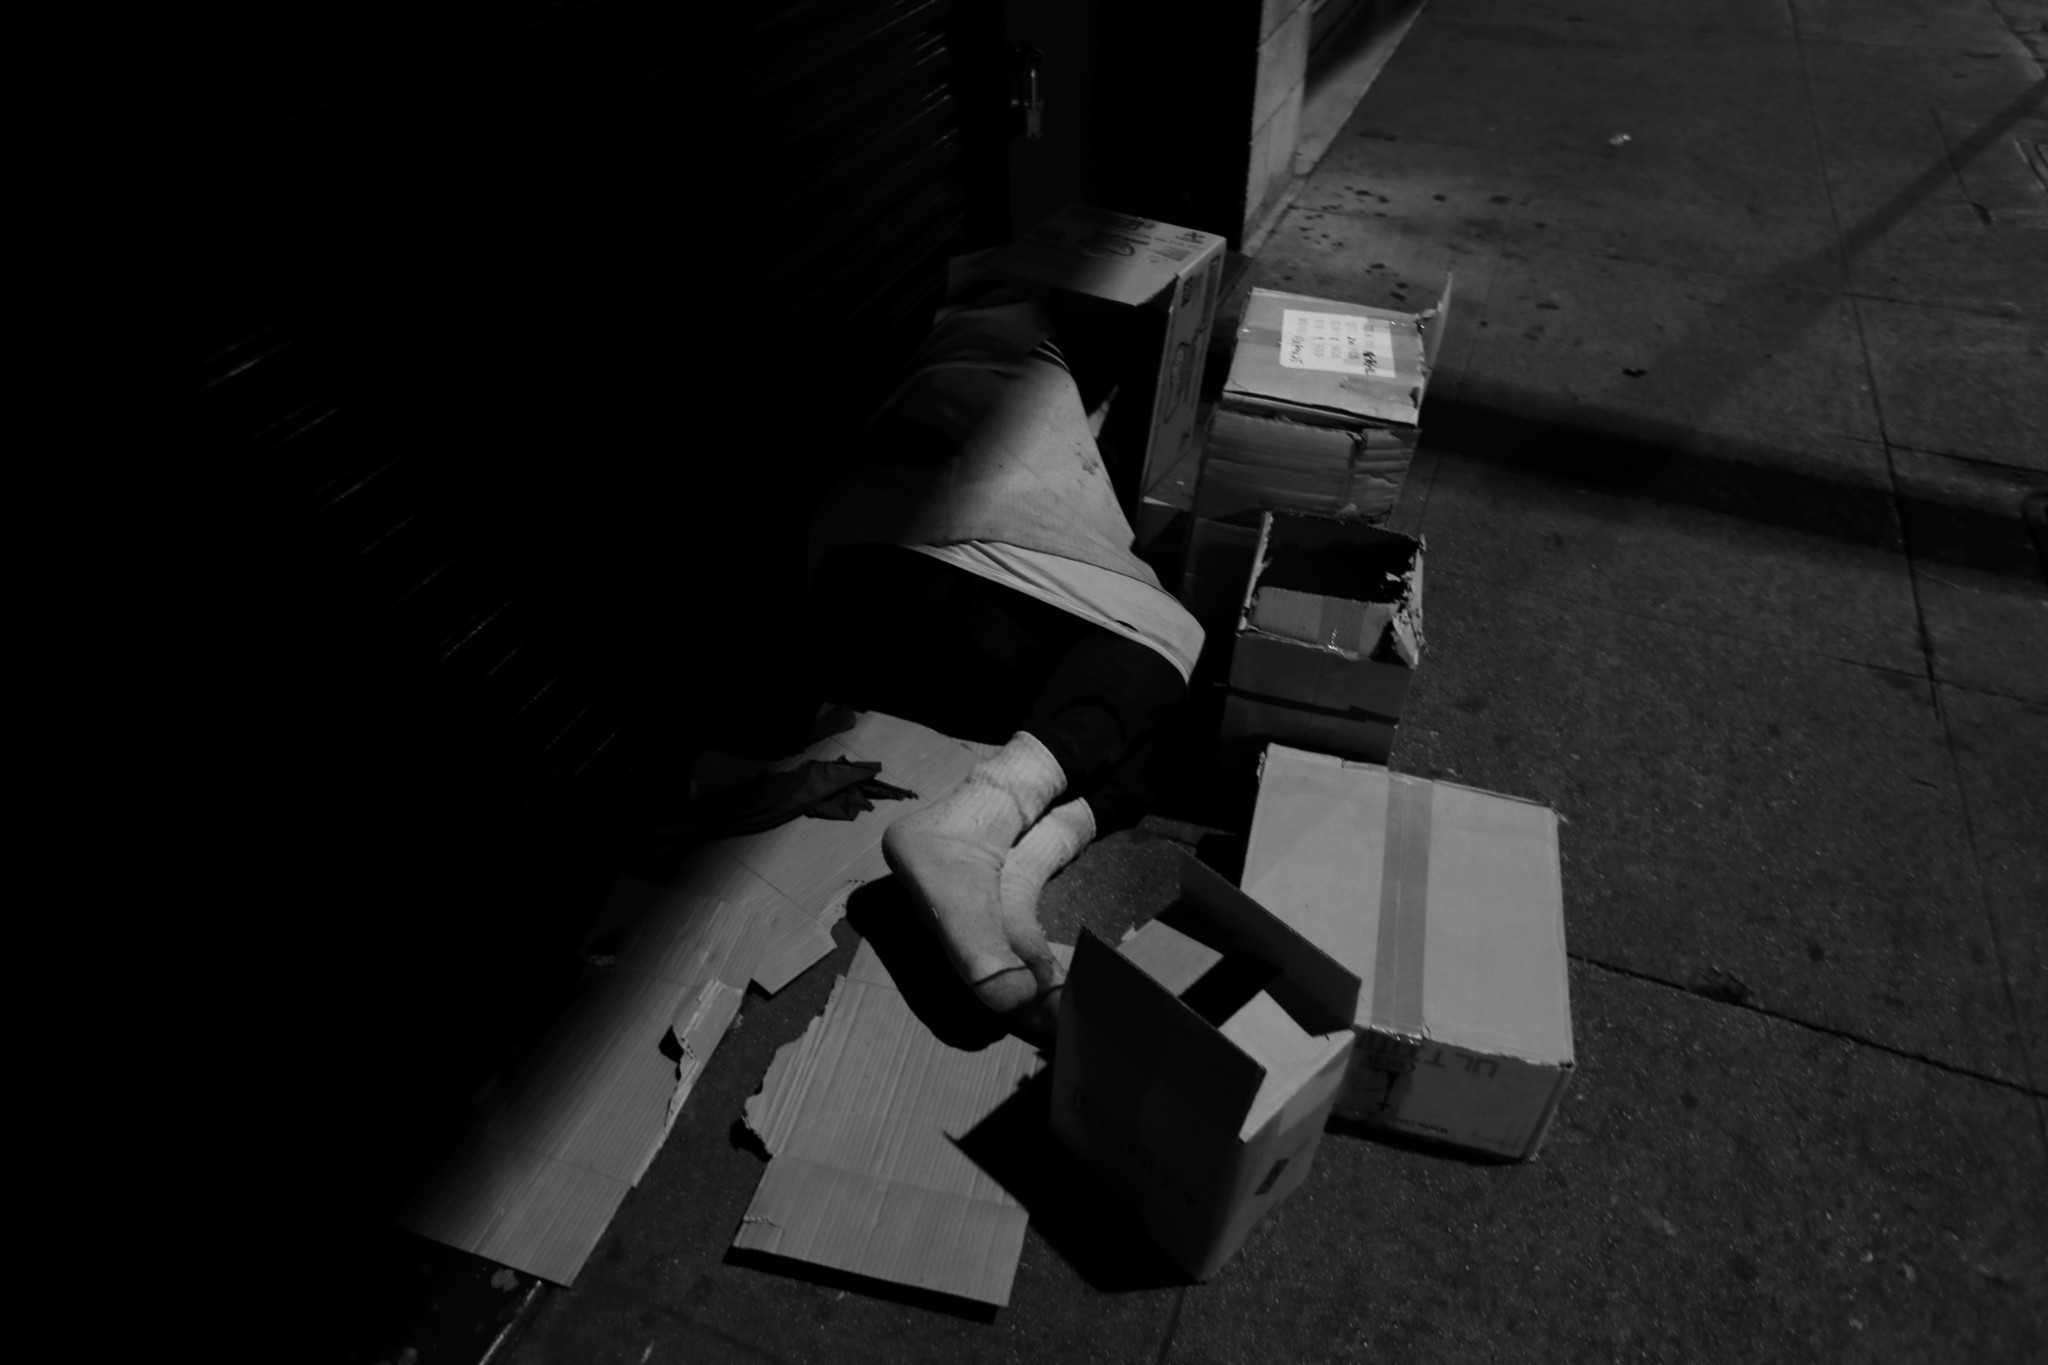 LOS ANGELES, CA February 2, 2018: A person sleeps on a piece of card board, surrounded by boxes o